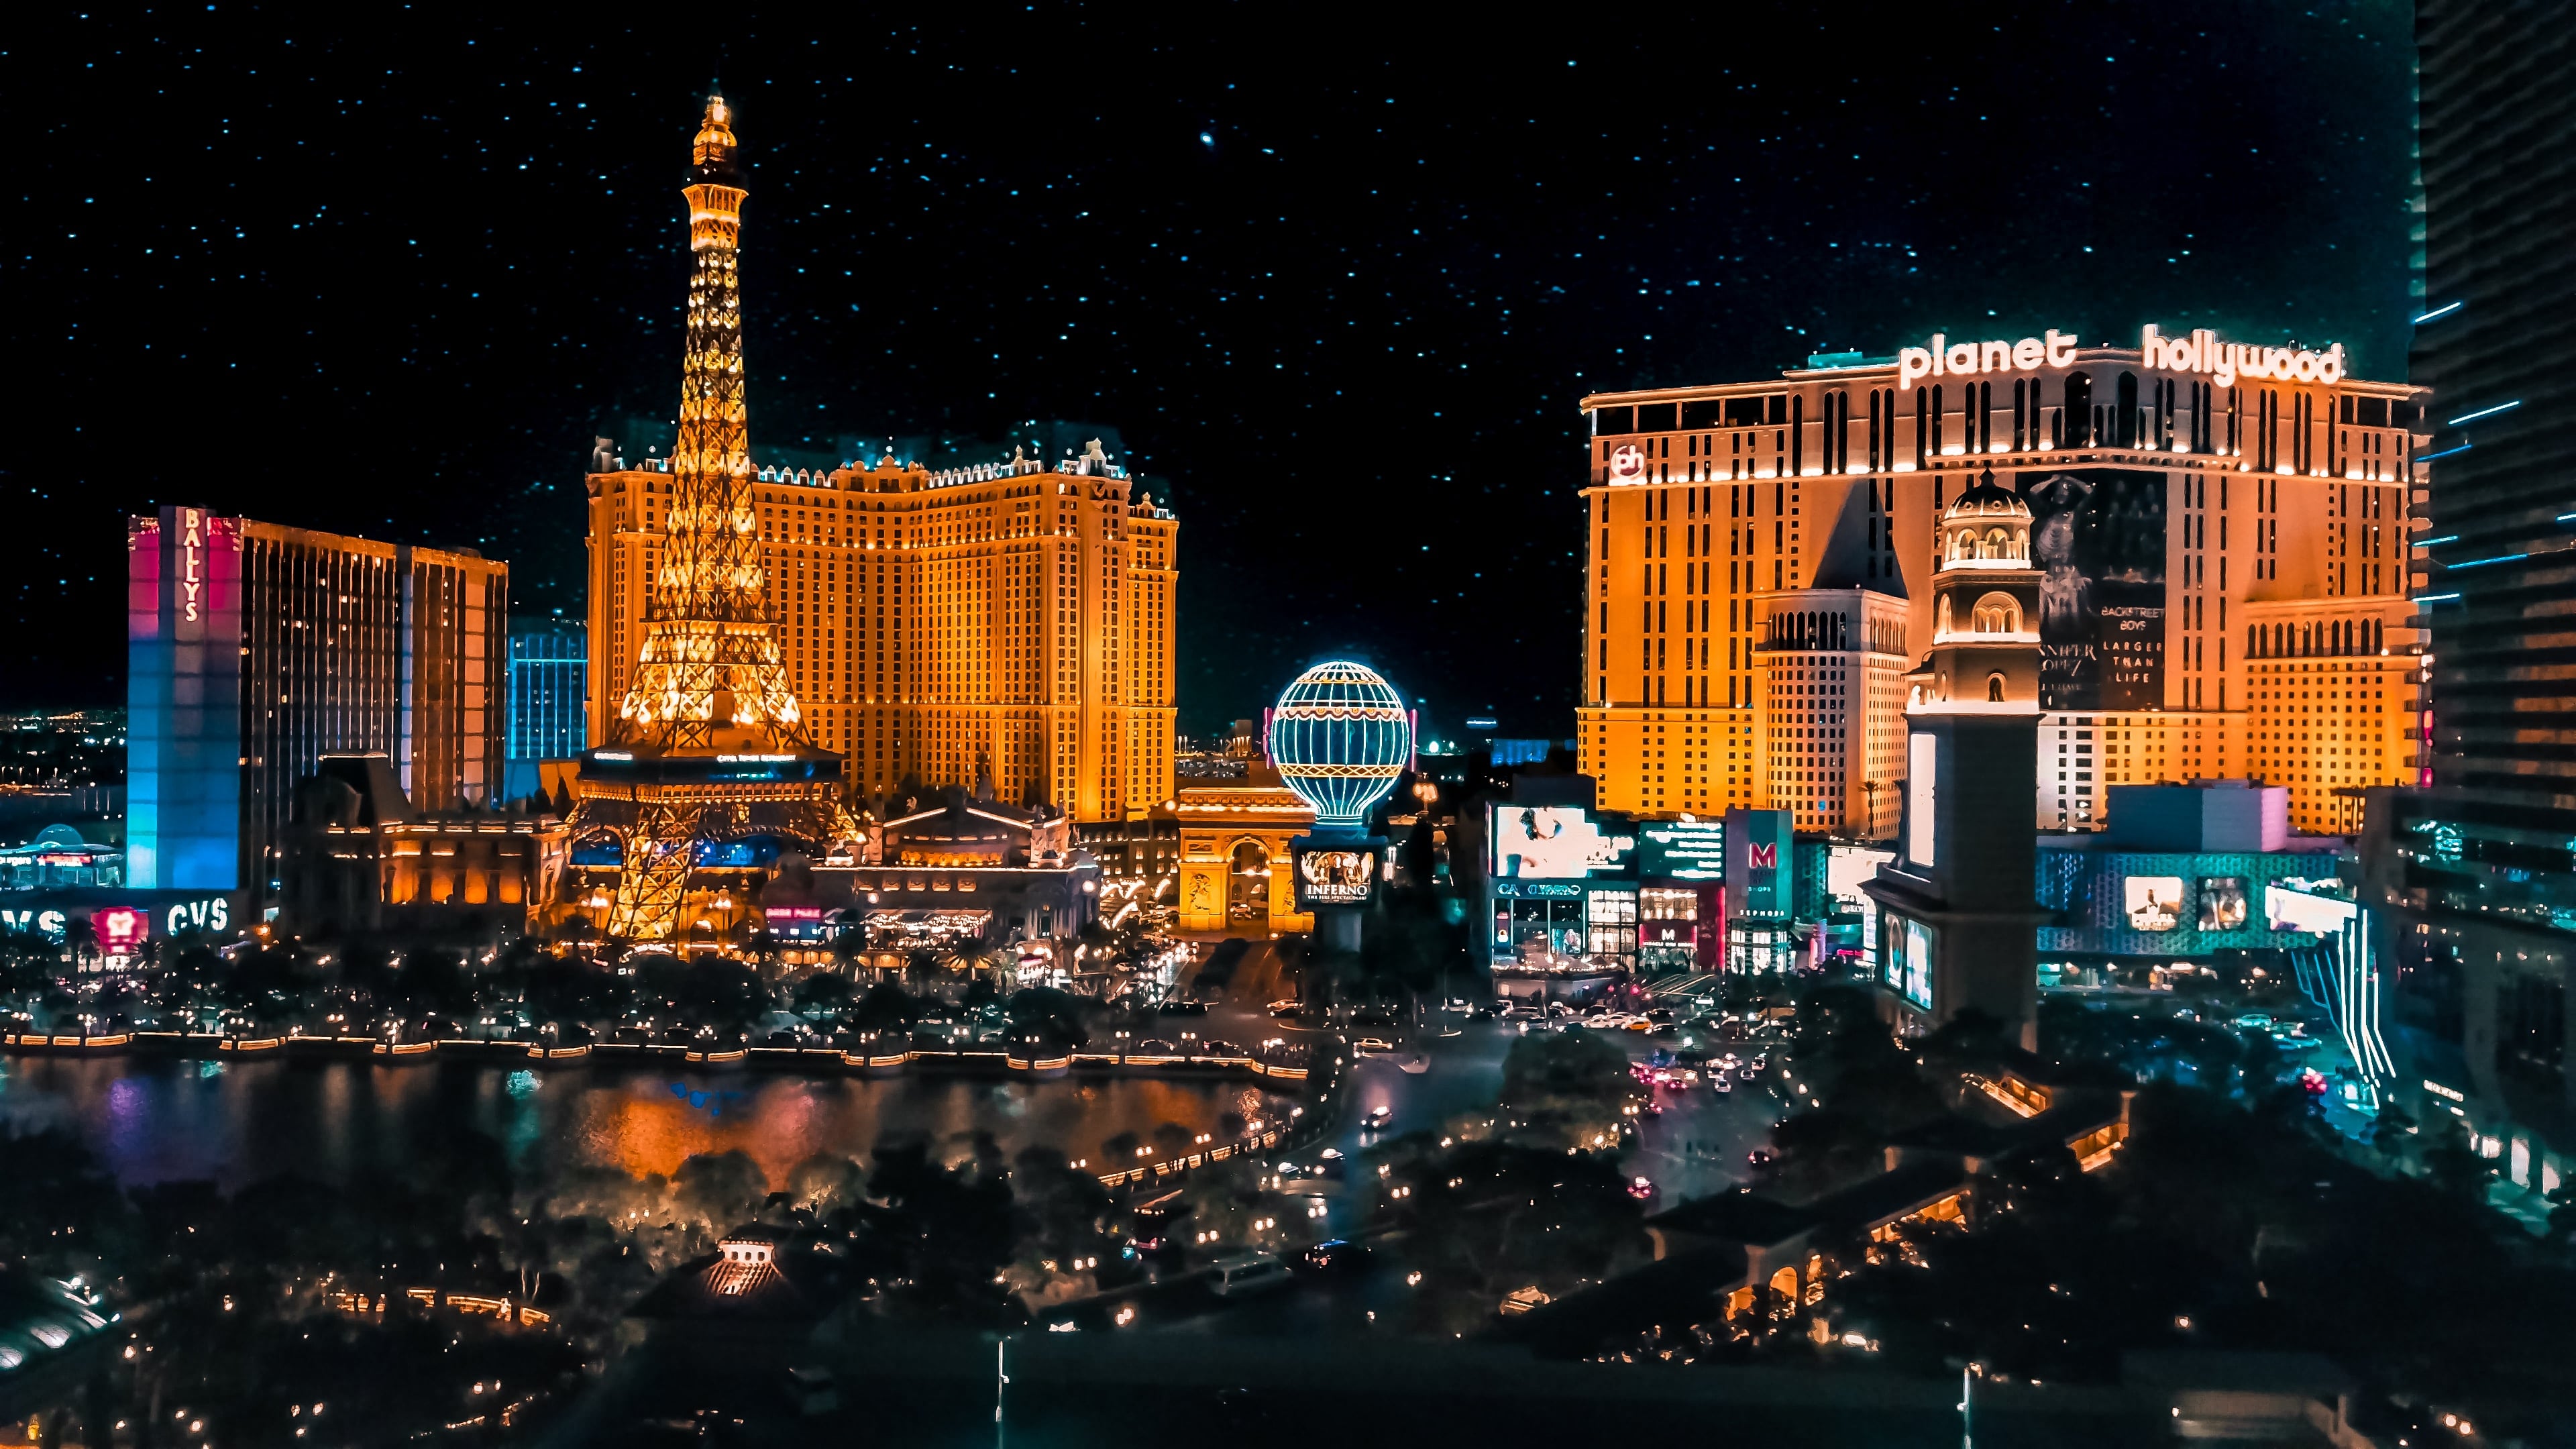 limiet Bijproduct passage las vegas ranked as one of the top cities in the country